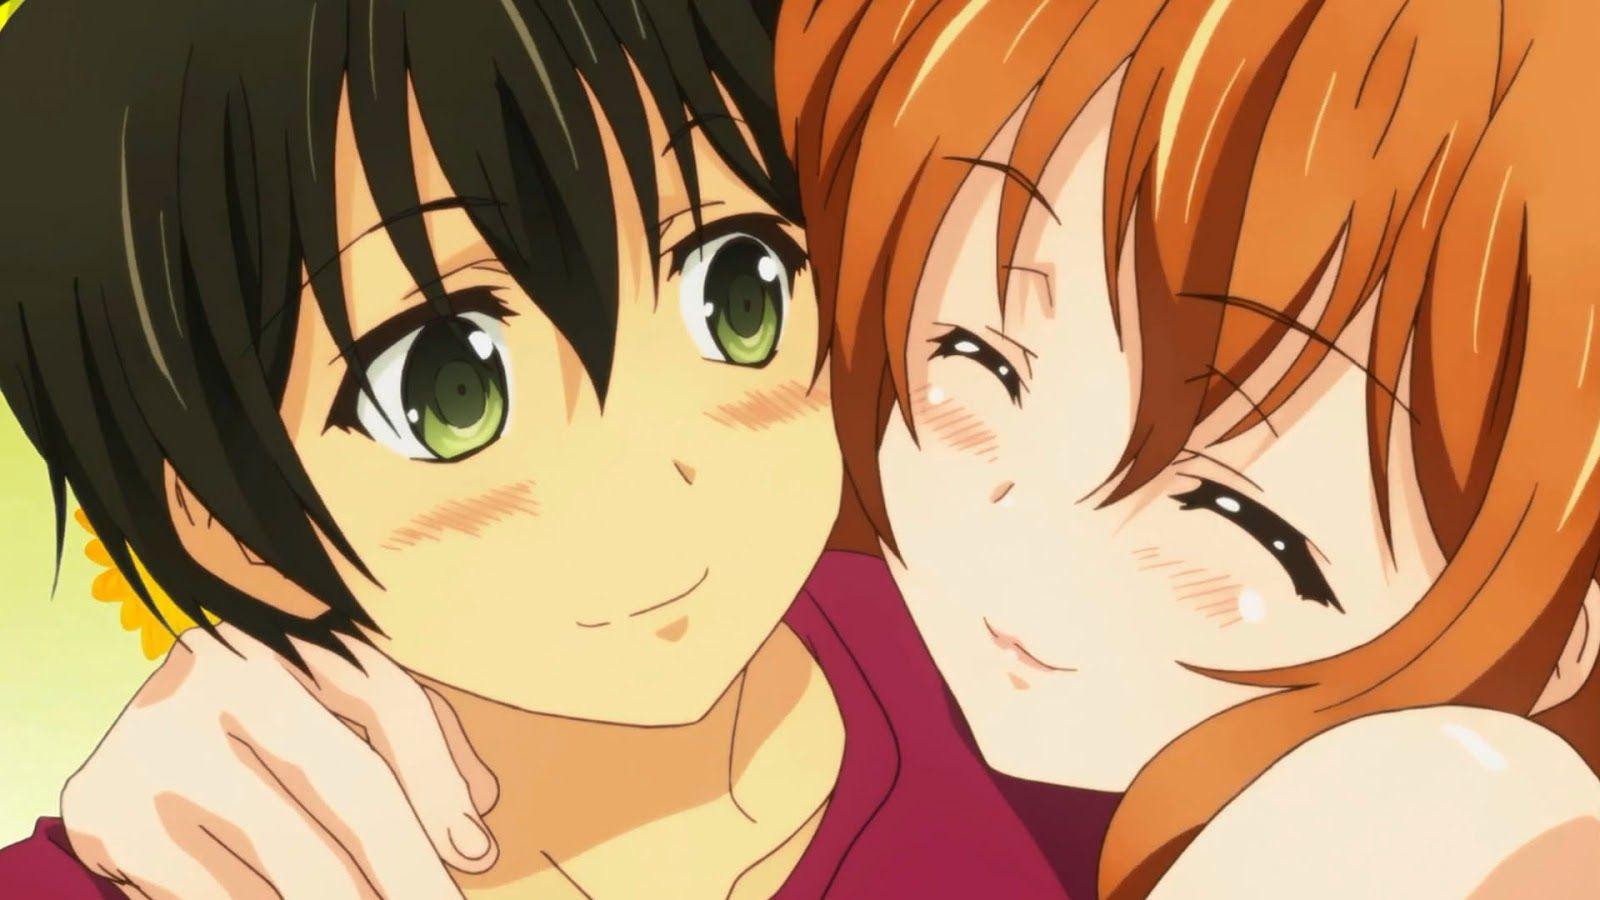 Golden Time (TV Series) Wallpapers (31+ images inside)